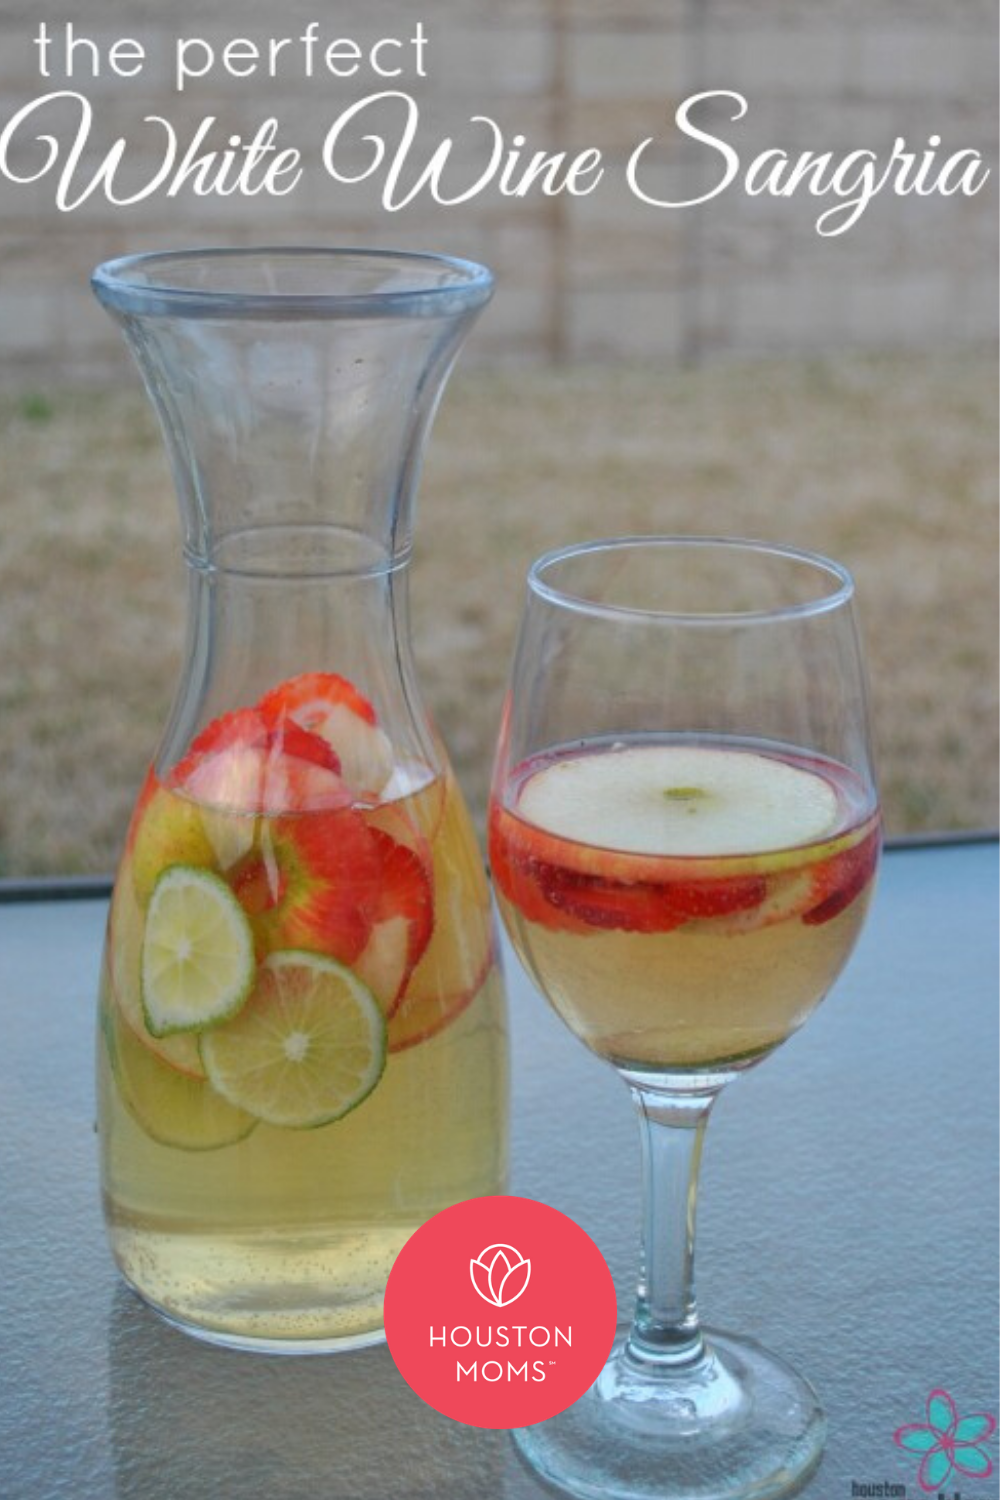 The Perfect White Wine Sangria. A pitcher and glass of white sangria with limes, strawberries, and apples. Logo: Houston moms blog. 